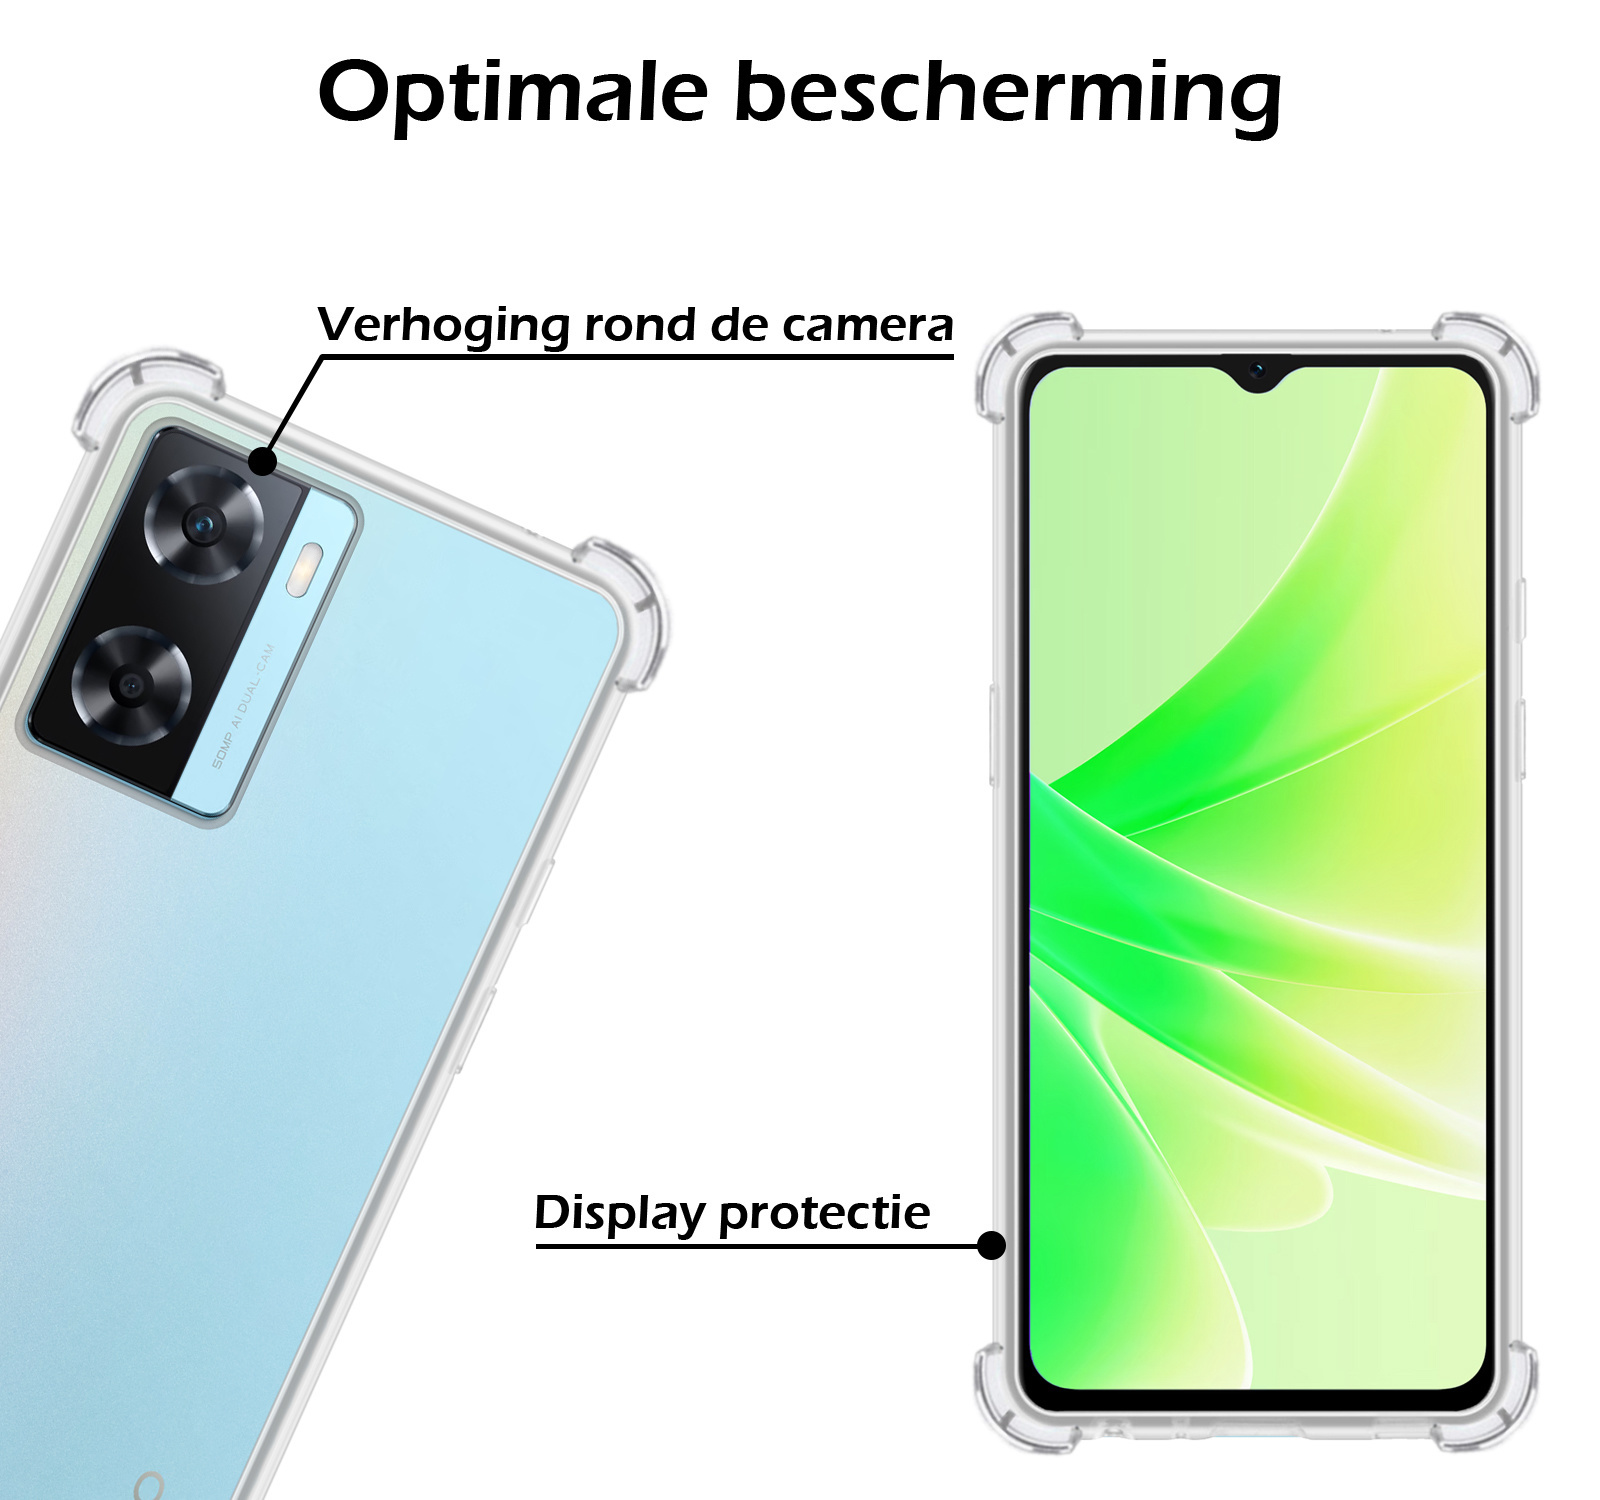 OPPO A57s Hoesje Shock Proof Cover Case Shockproof Met 2x Screenprotector - OPPO A57s Transparant Shock Proof Back Case